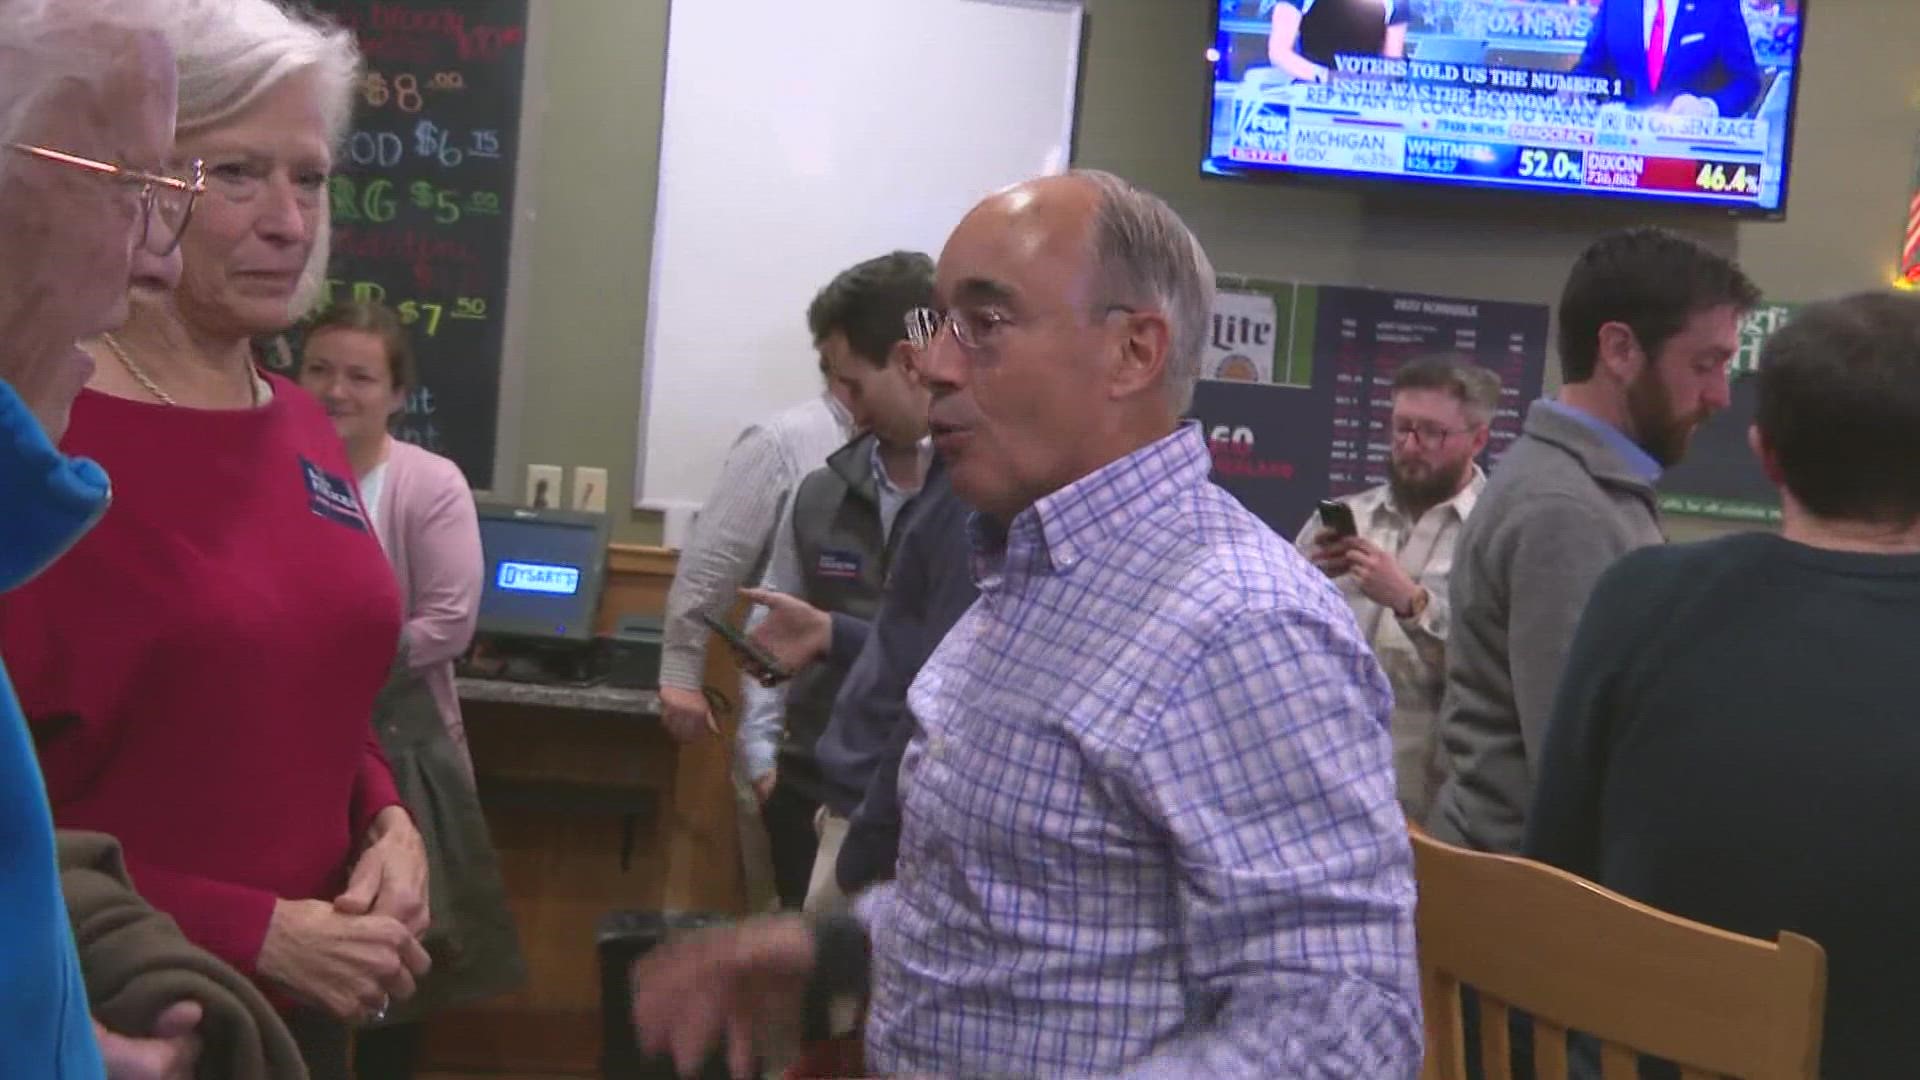 The race includes ranked-choice voting, which Golden needed to defeat Republican challenger Bruce Poliquin last time.